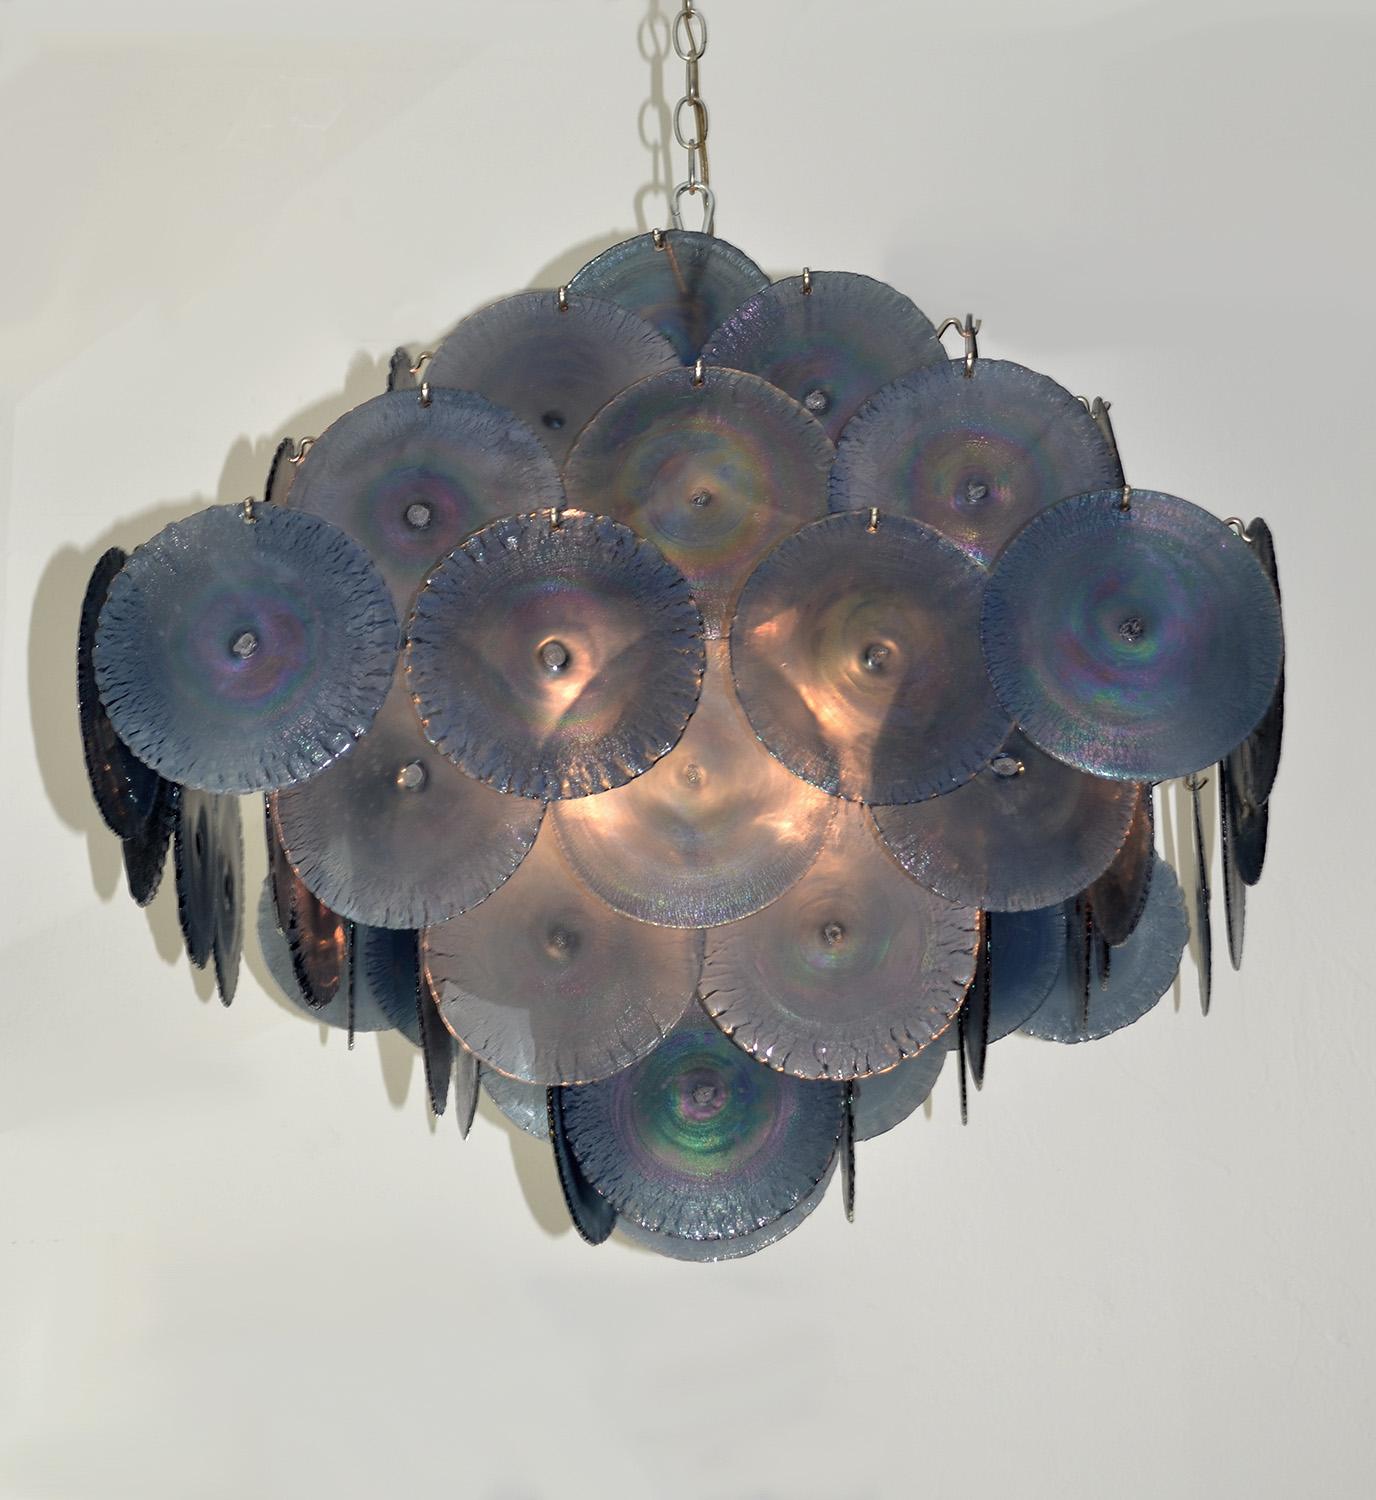 Large iridescent purple Murano glass chandelier by Vistosi, Italy, 1970s. Double pyramid-shaped composed of iridescent hand blown Murano glass discs that shimmer and glow like soap bubbles. Twelve bulbs on a central tiered frame. Chain not included.